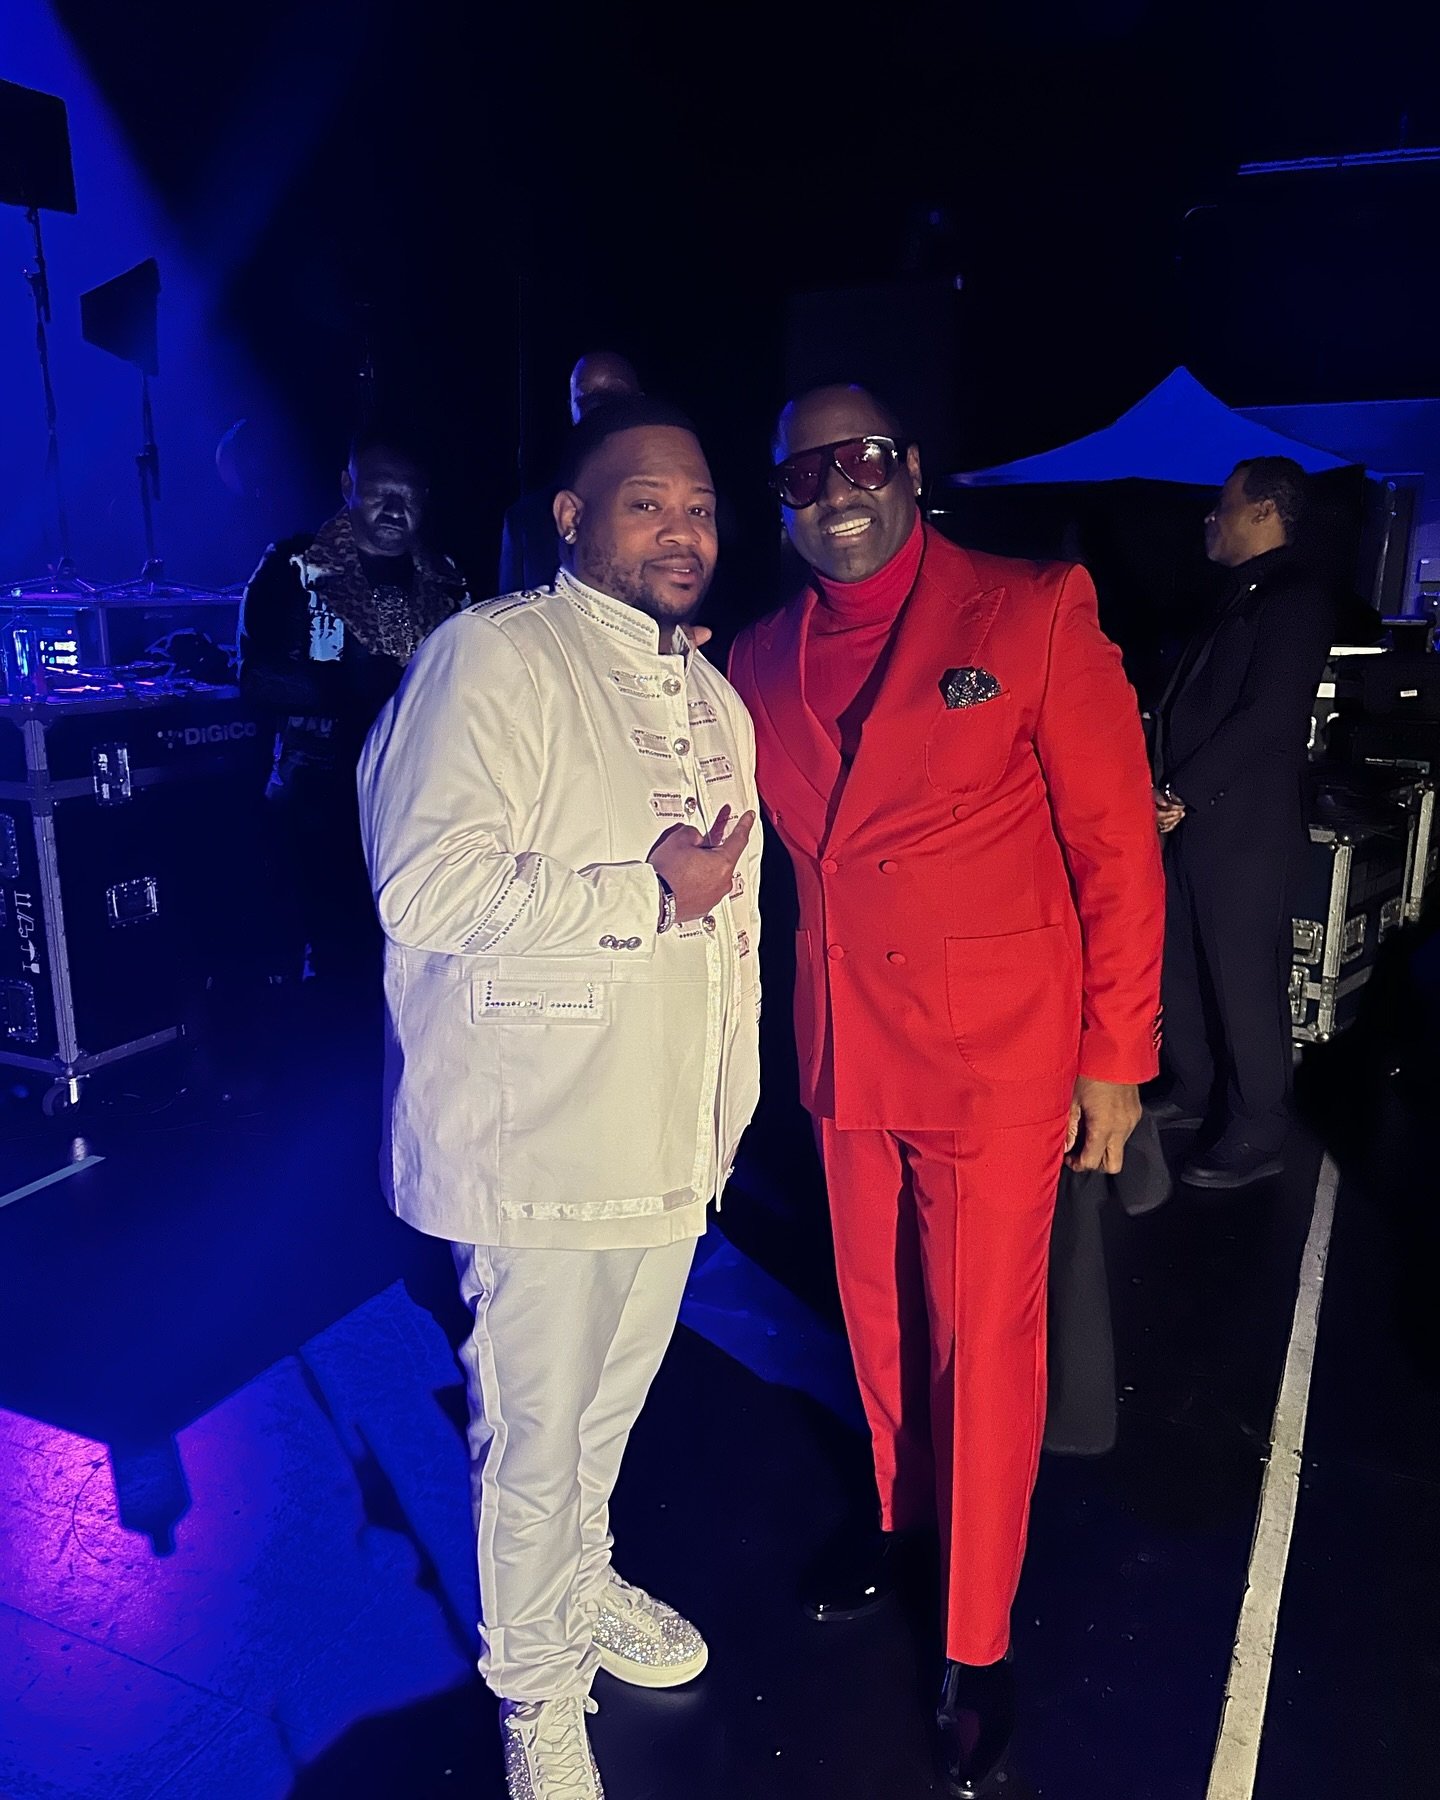 Help me wish my brother @realjohnnygill22 a happy birthday🎂🎉